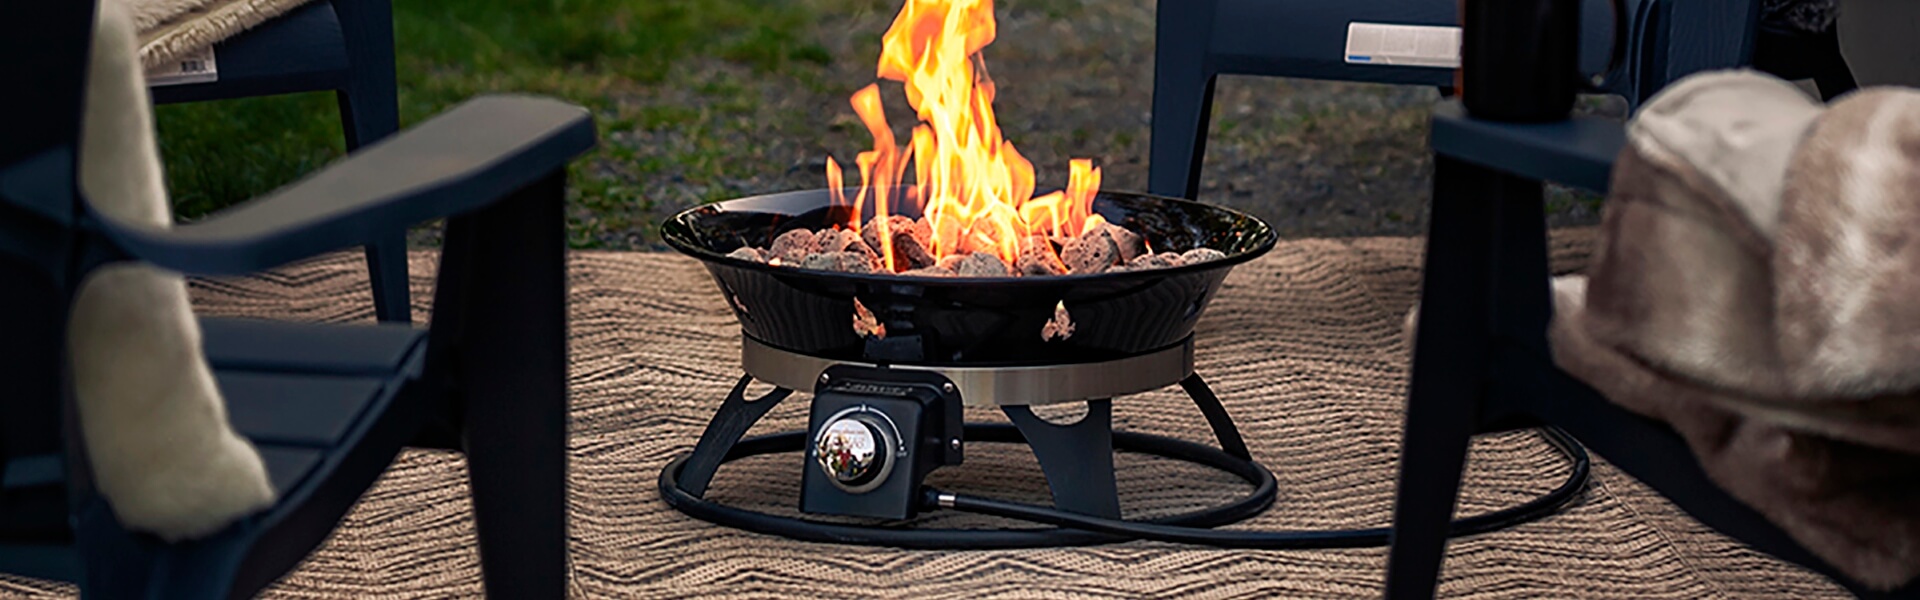 7 Best Fire Pits Under 200 Reviewed, Propane Fire Pit Table Under $200